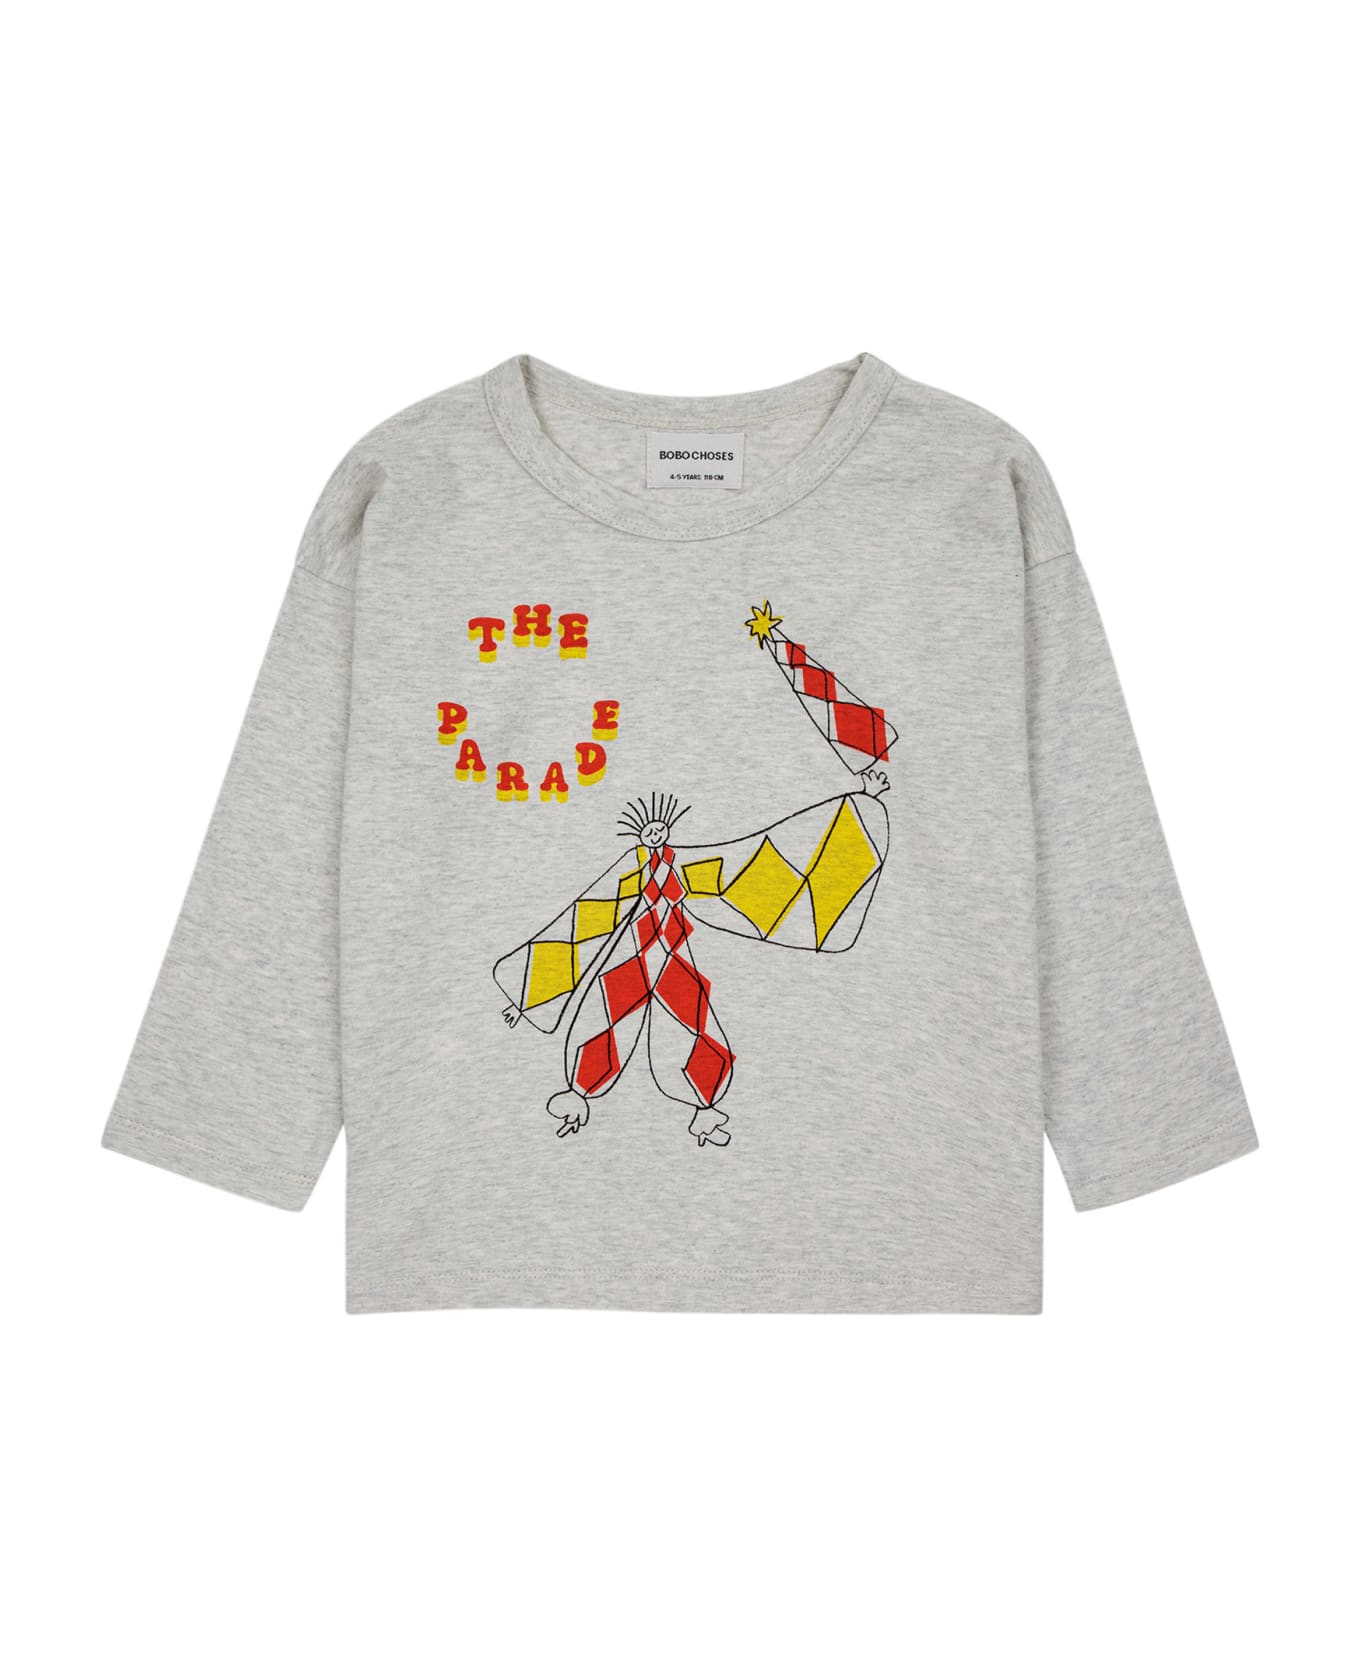 Bobo Choses Gray T-shirt For Kids With Multicolor Print - Grey